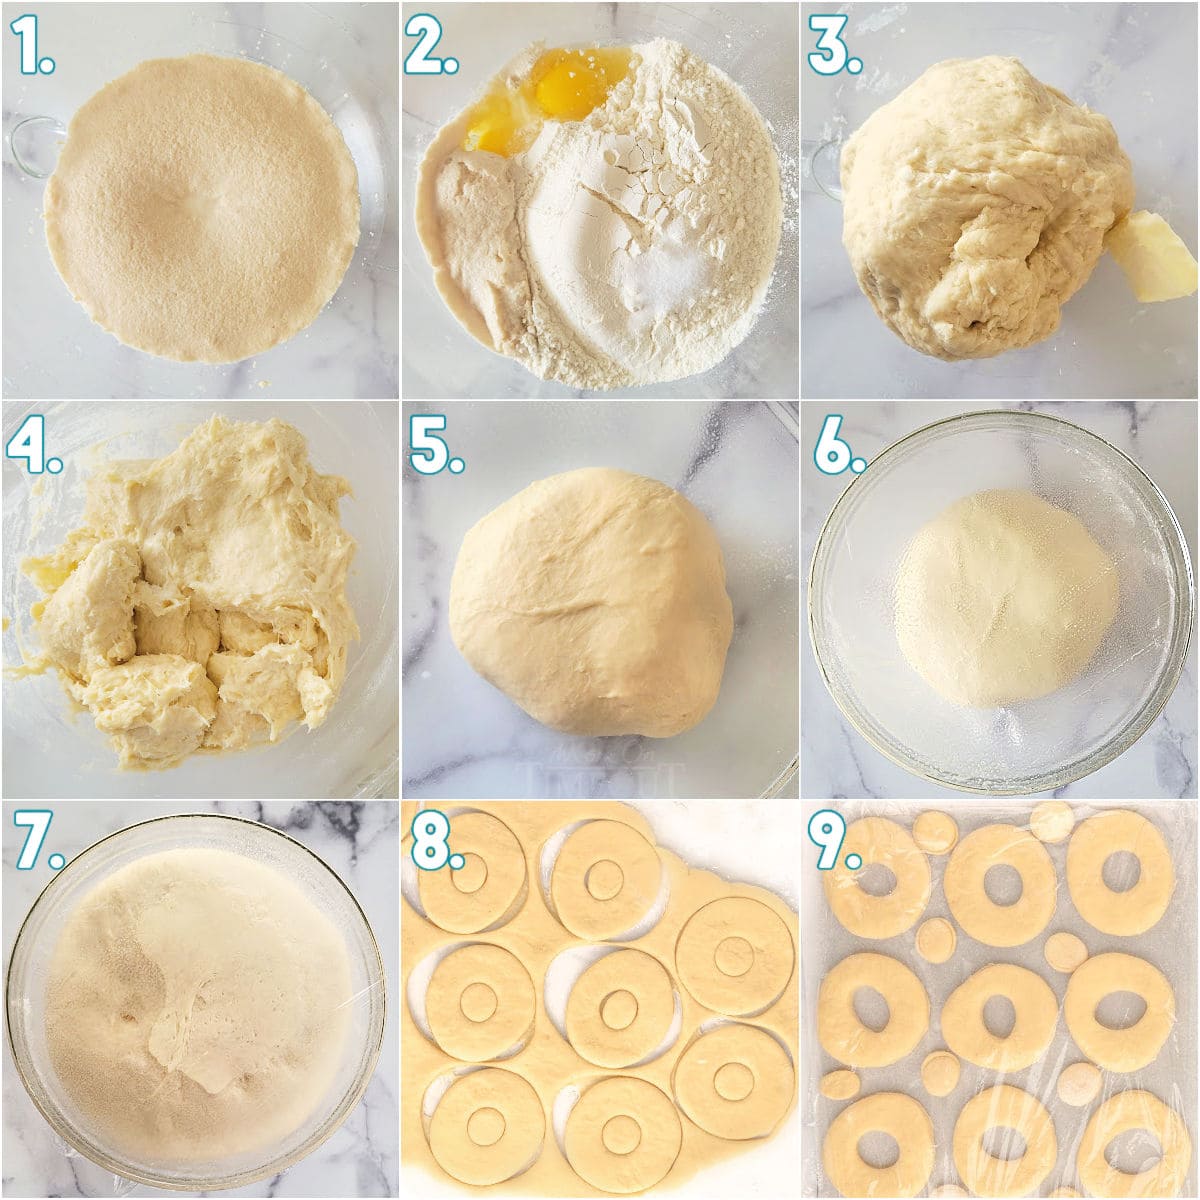 nine image collage showing how to make glazed donuts step by step. steps are numbered.